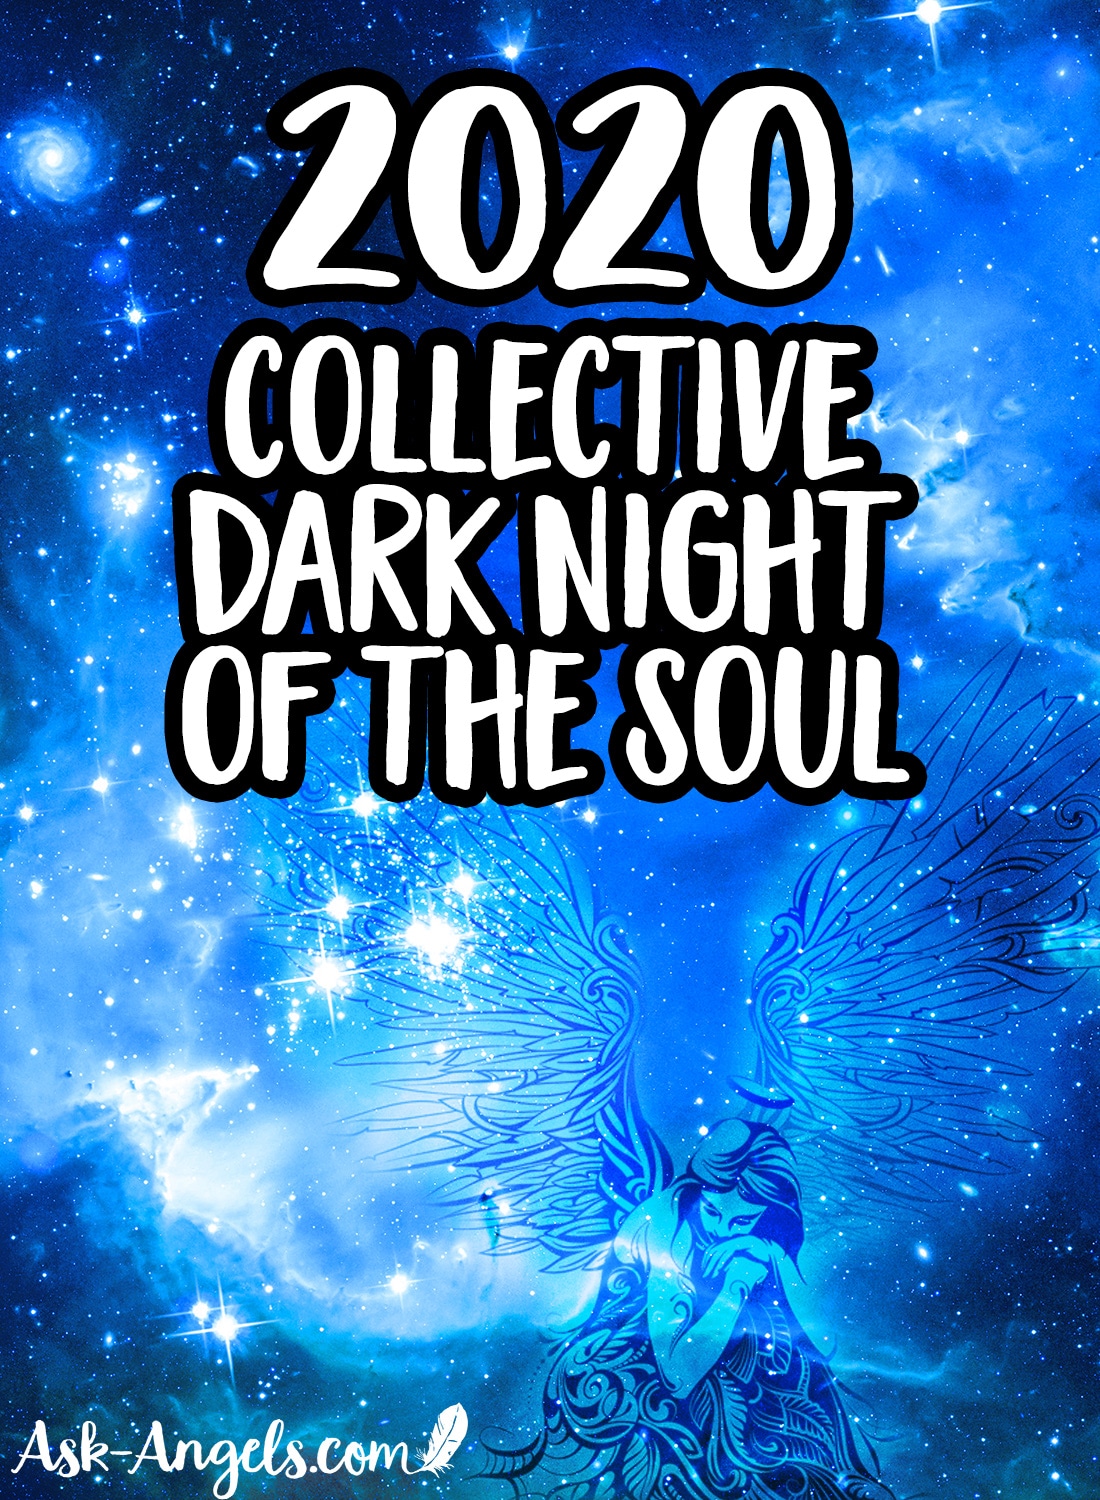 2020 - Collective Dark Night of the Soul